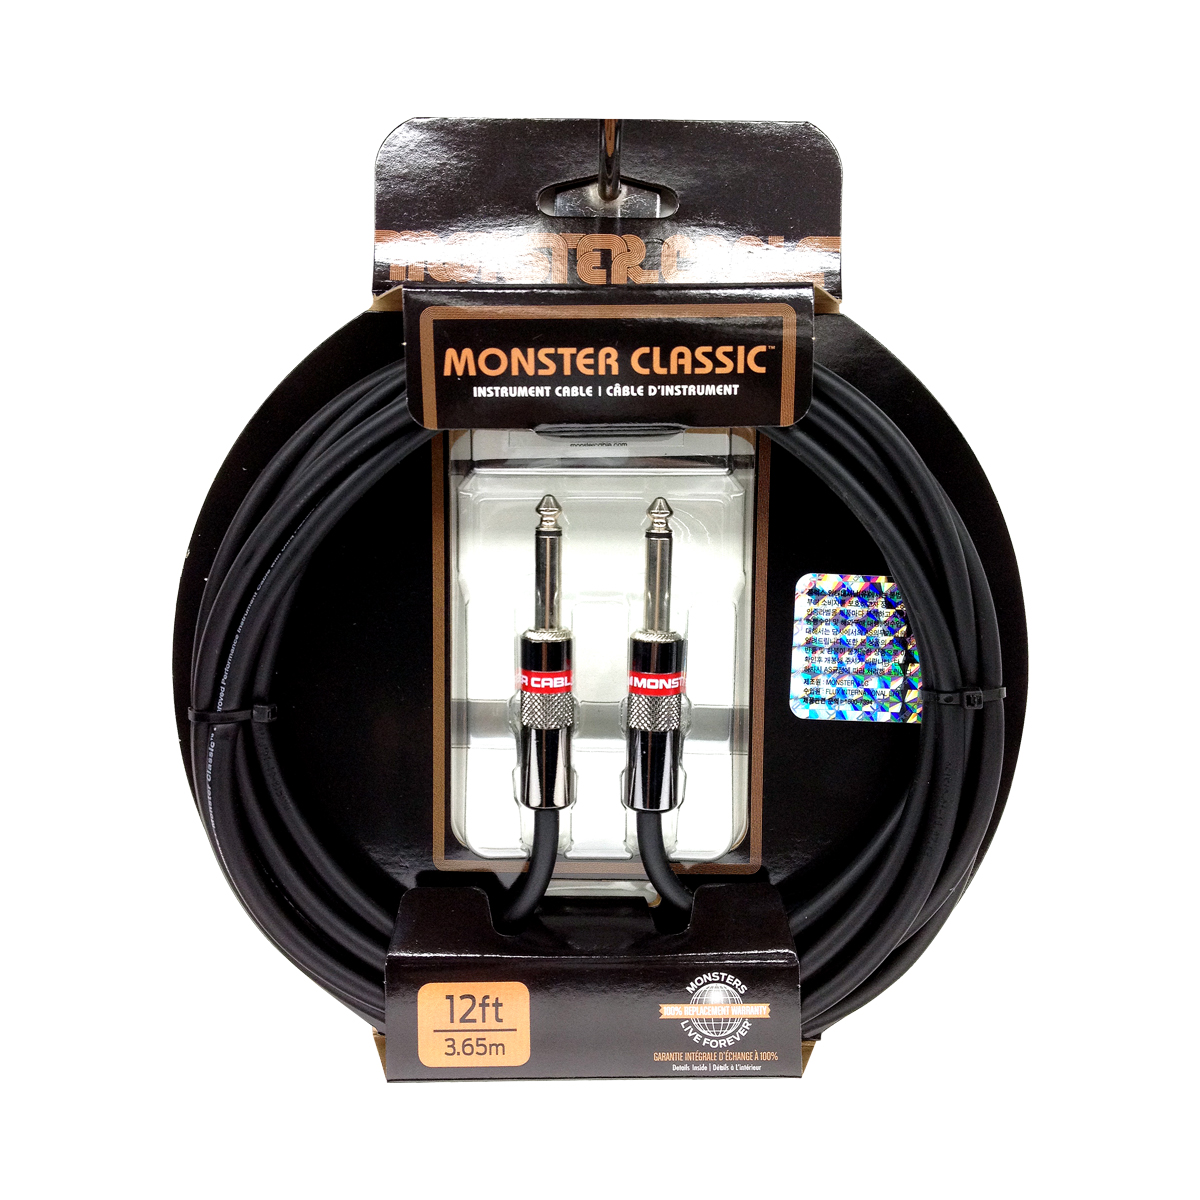 Monster Classic Instrument Cable 건반용 [12ft or 21ft]